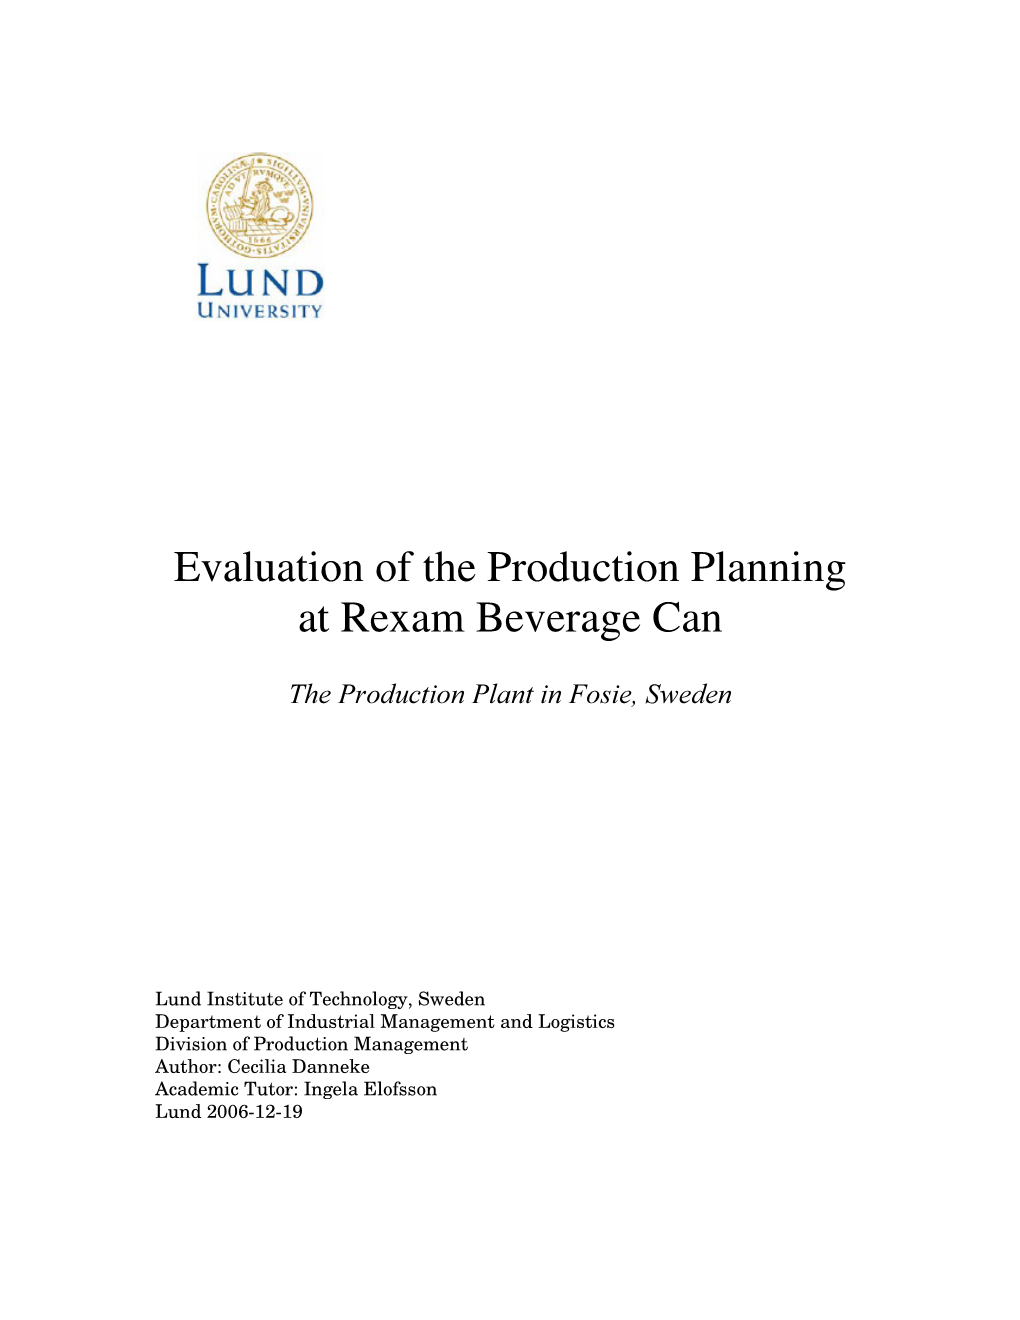 Evaluation of the Production Planning at Rexam Beverage Can